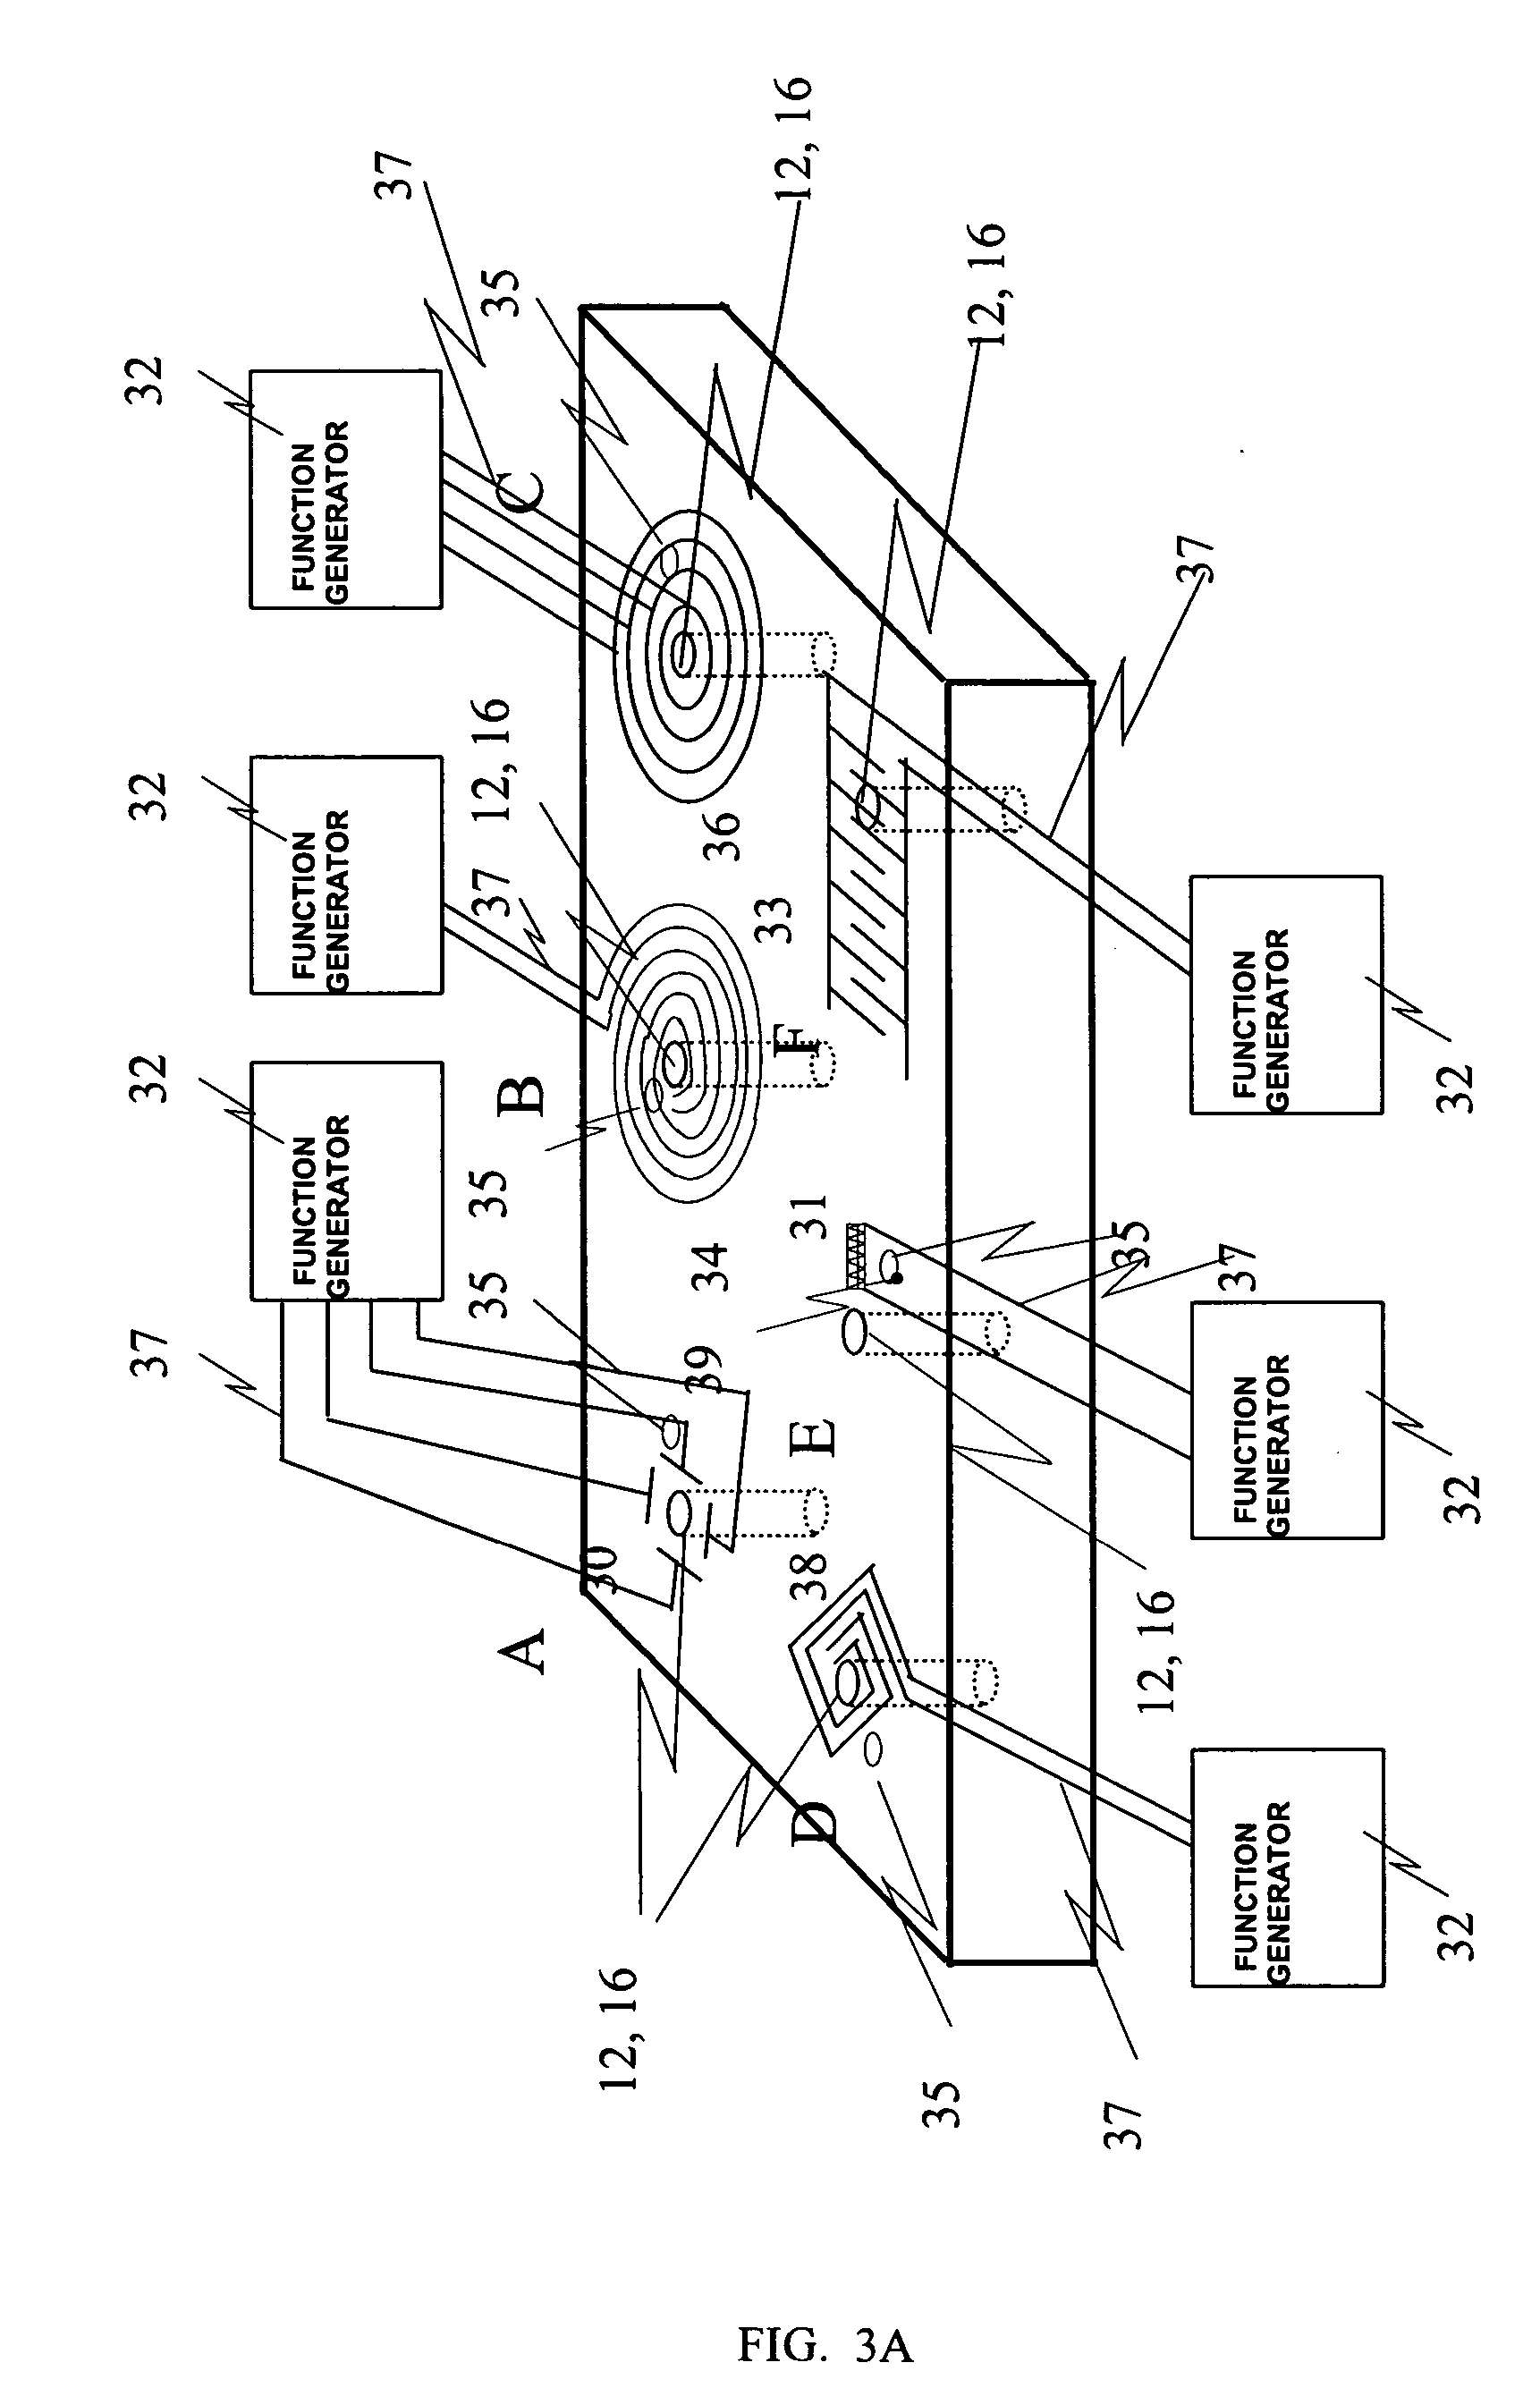 Apparatus including ion transport detecting structures and methods of use